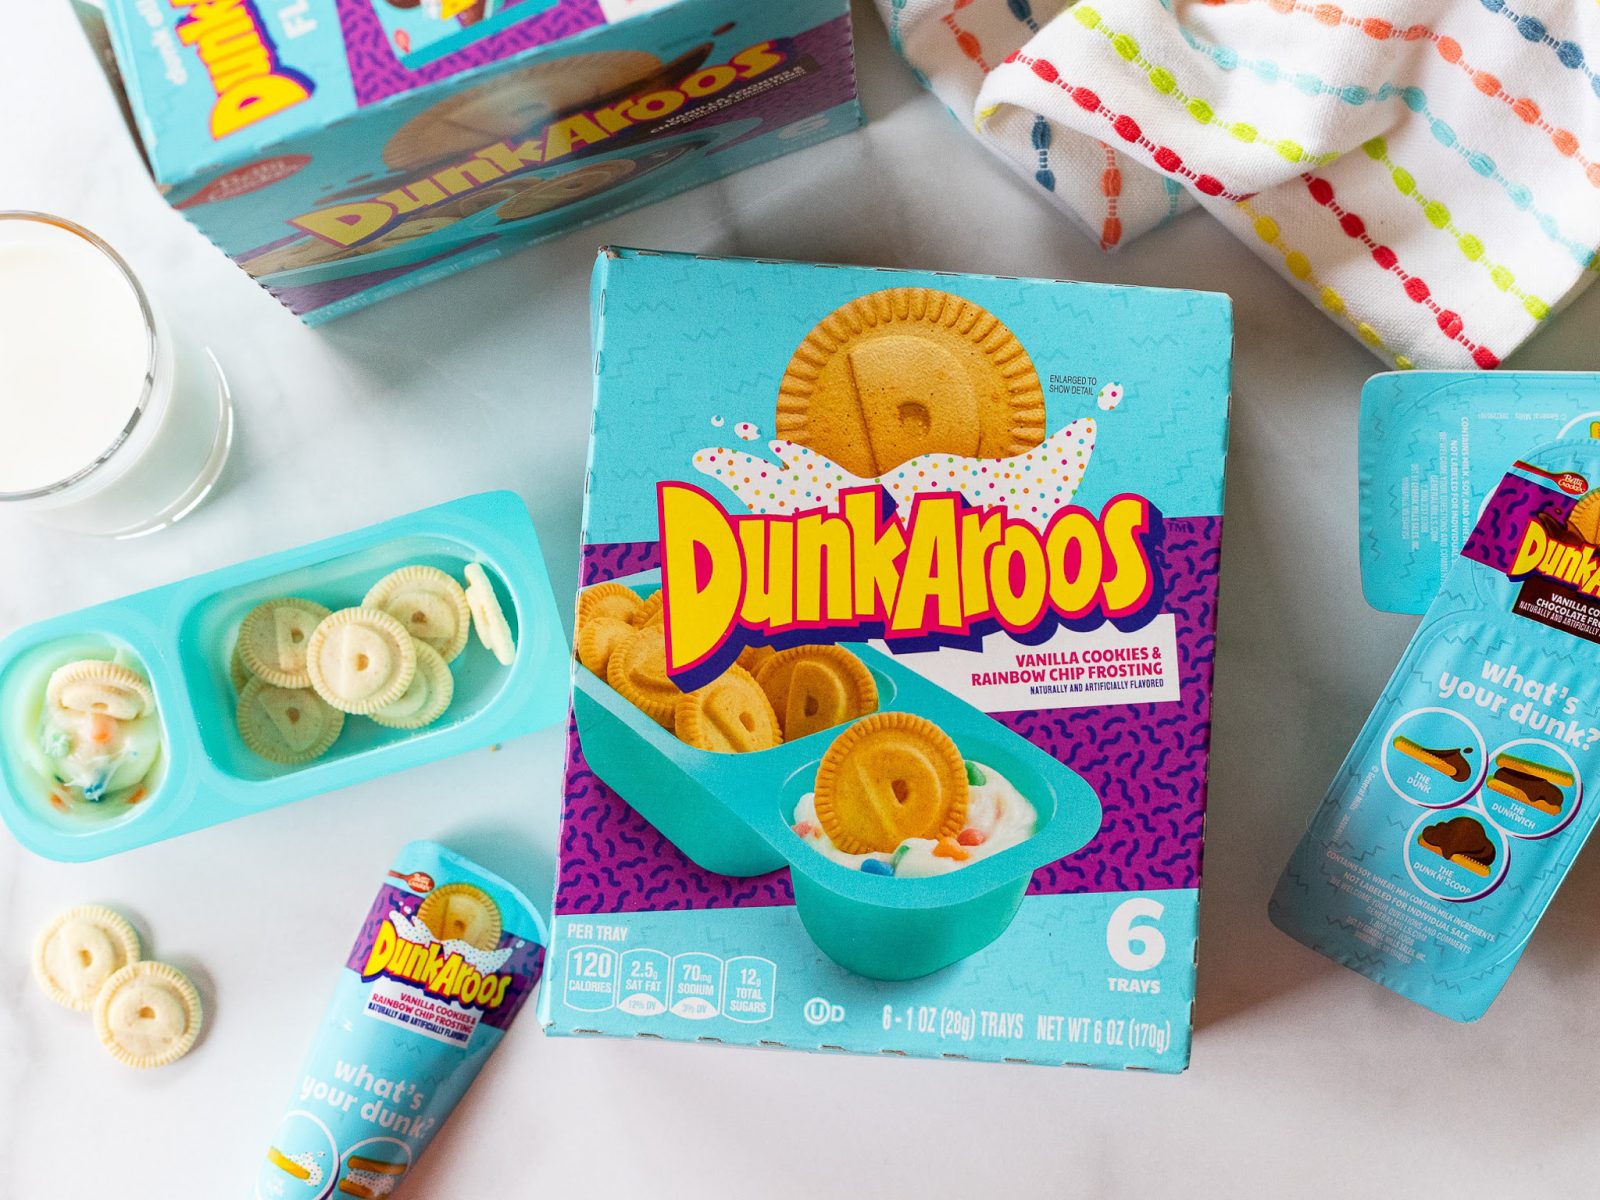 Get Betty Crocker Dunkaroos For Just $2 At Publix – Almost Half Price